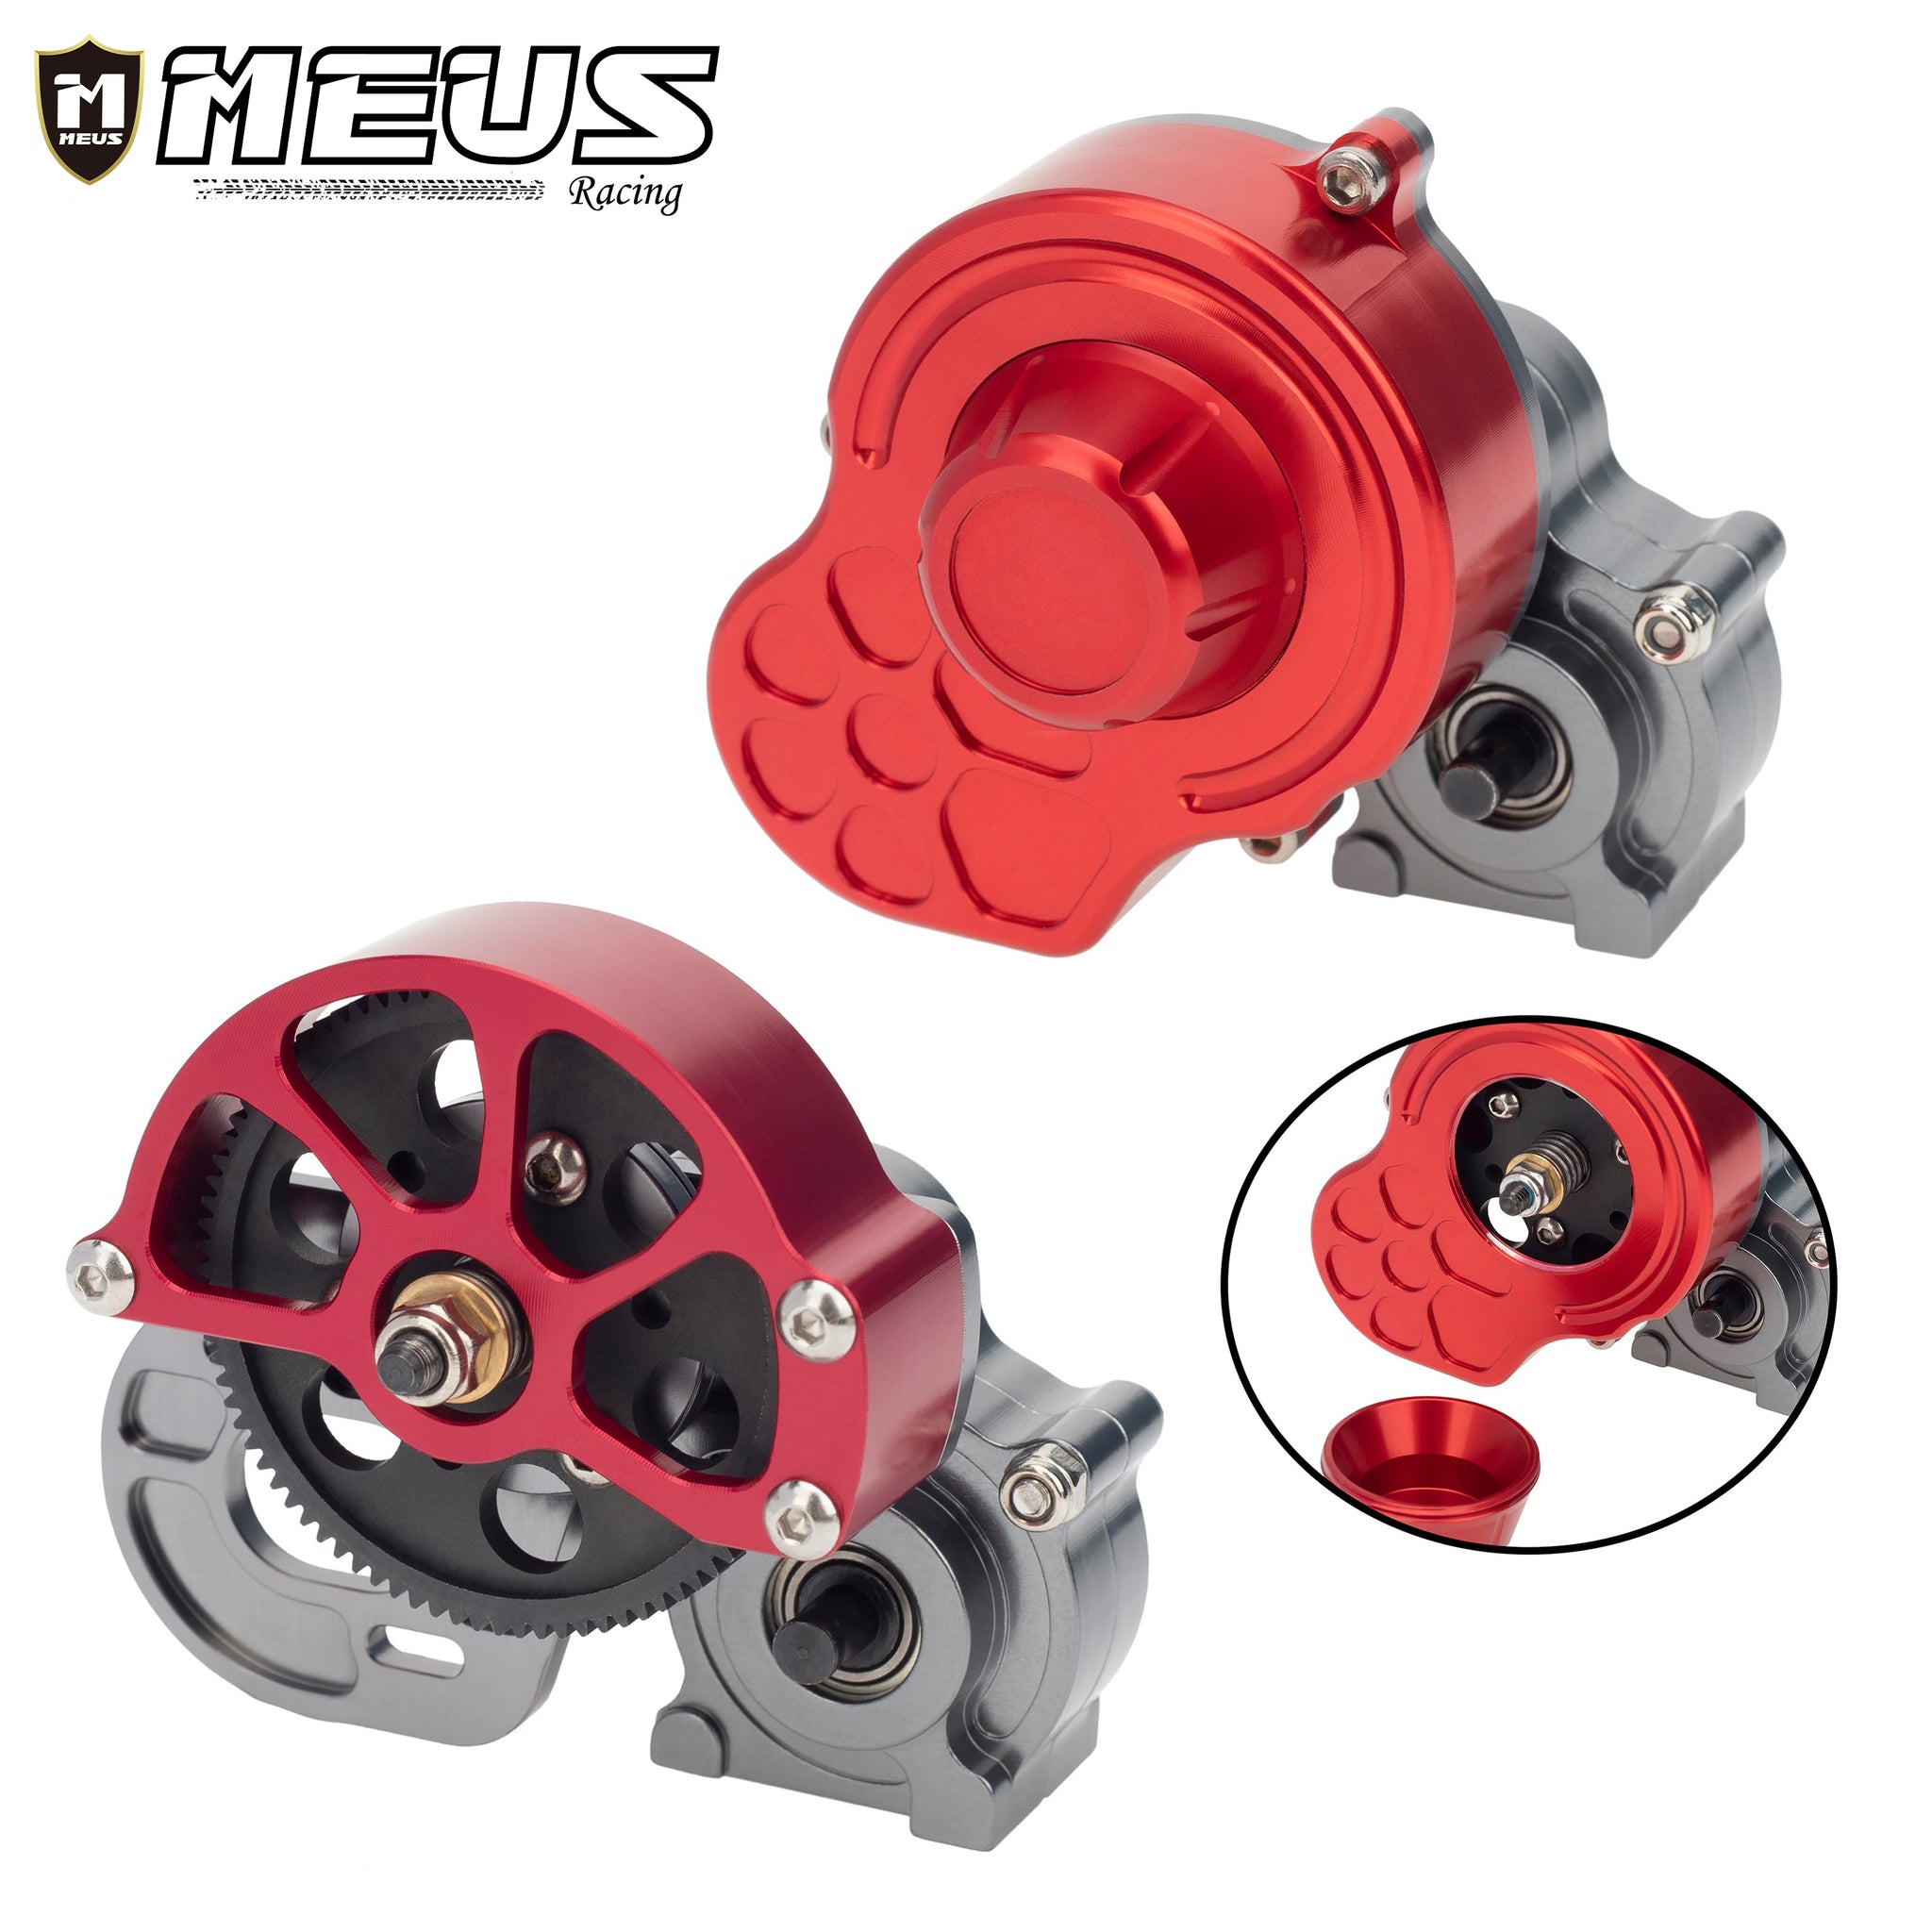 Meus Racing Metal Transmission Gearbox Case with Gear Complete for 1/10 Axial SCX10